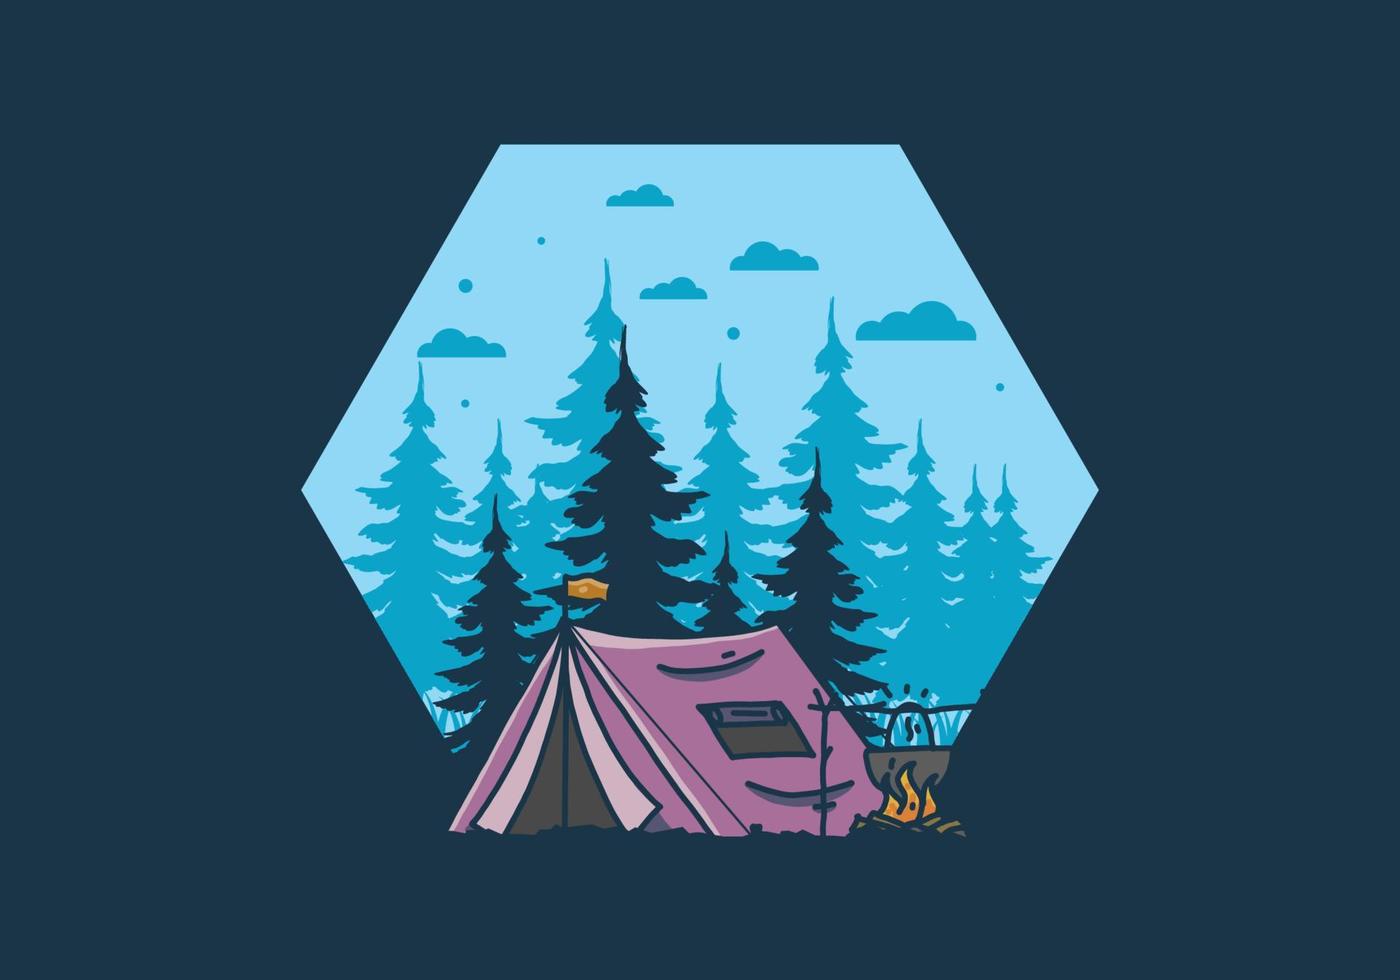 Camping and cooking in nature illustration vector